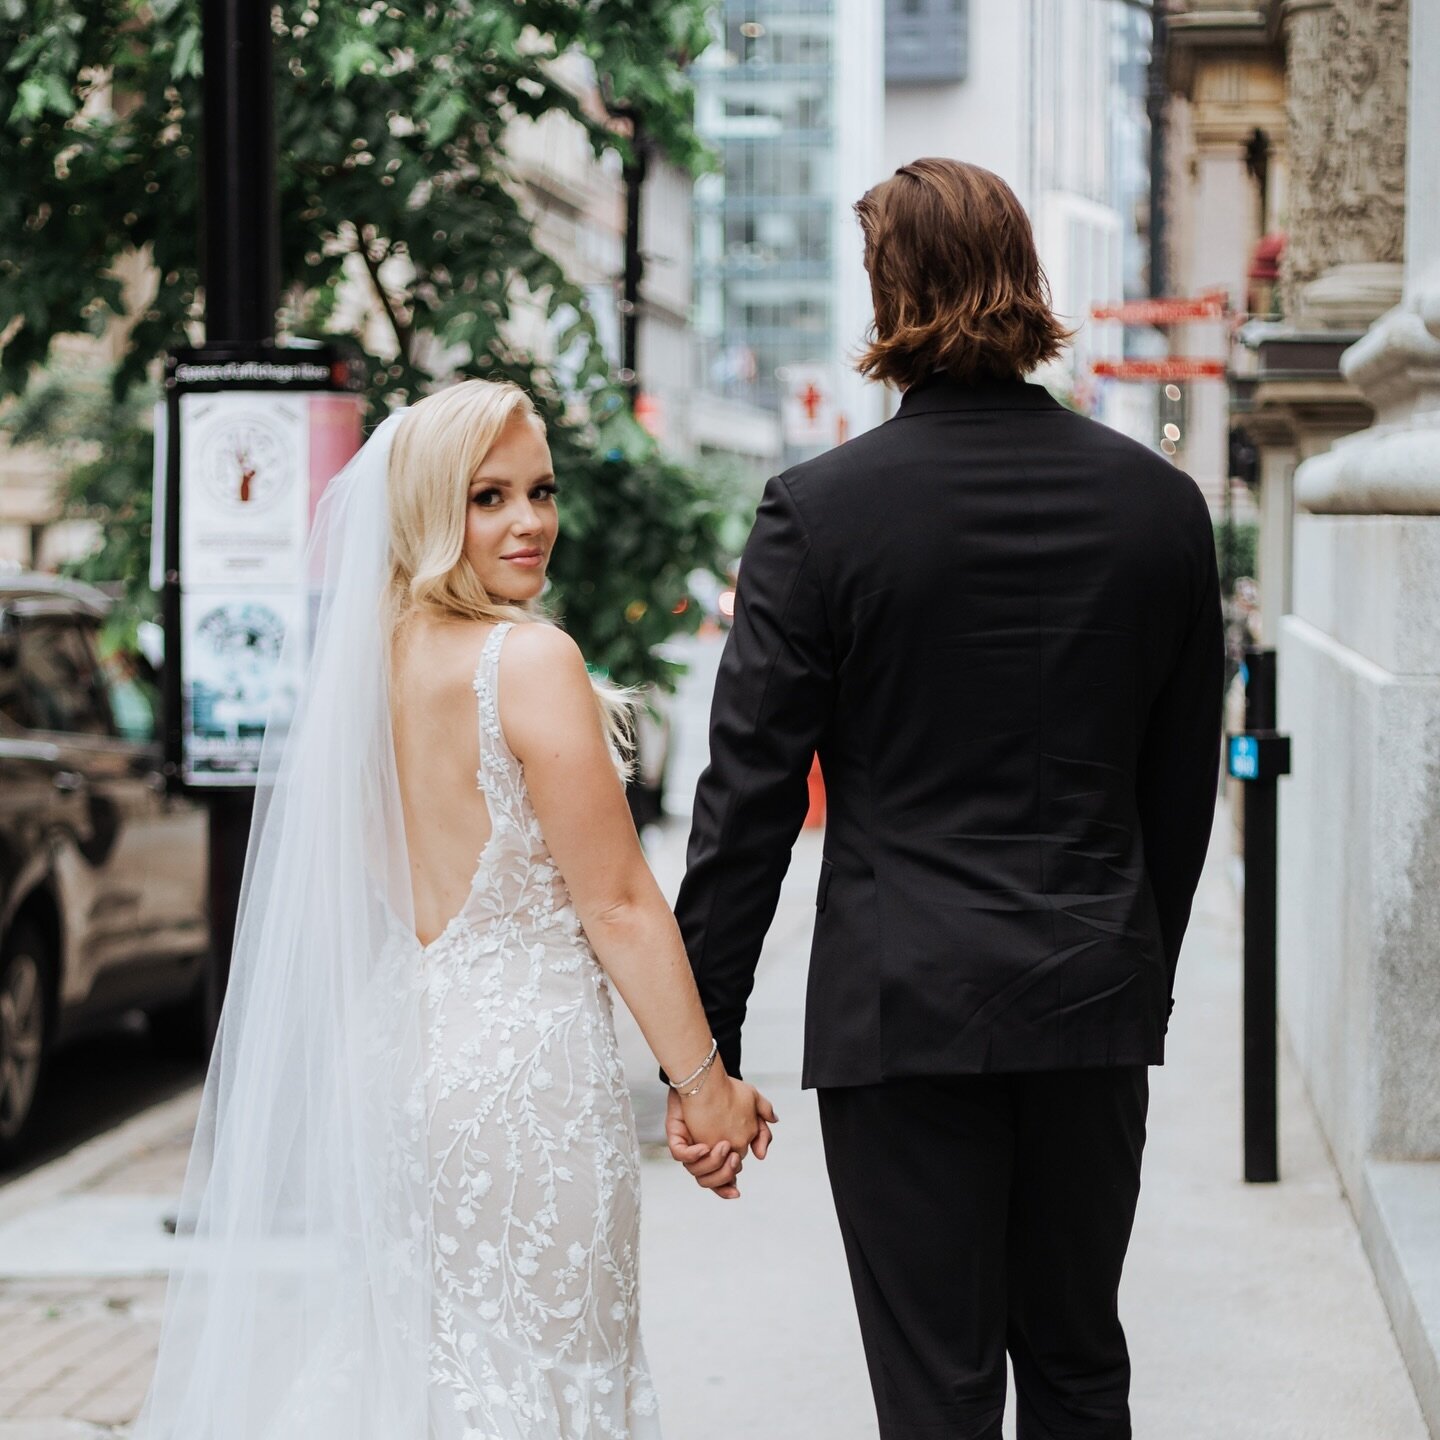 Amidst the city's chaos, Maxime and Andreane embraced a moment of serenity, momentarily swaying in gleeful smiles on the bustling streets. 

Here, in the midst of urban buzz, they created a lasting memory of joy, marking the start of a new and enchan